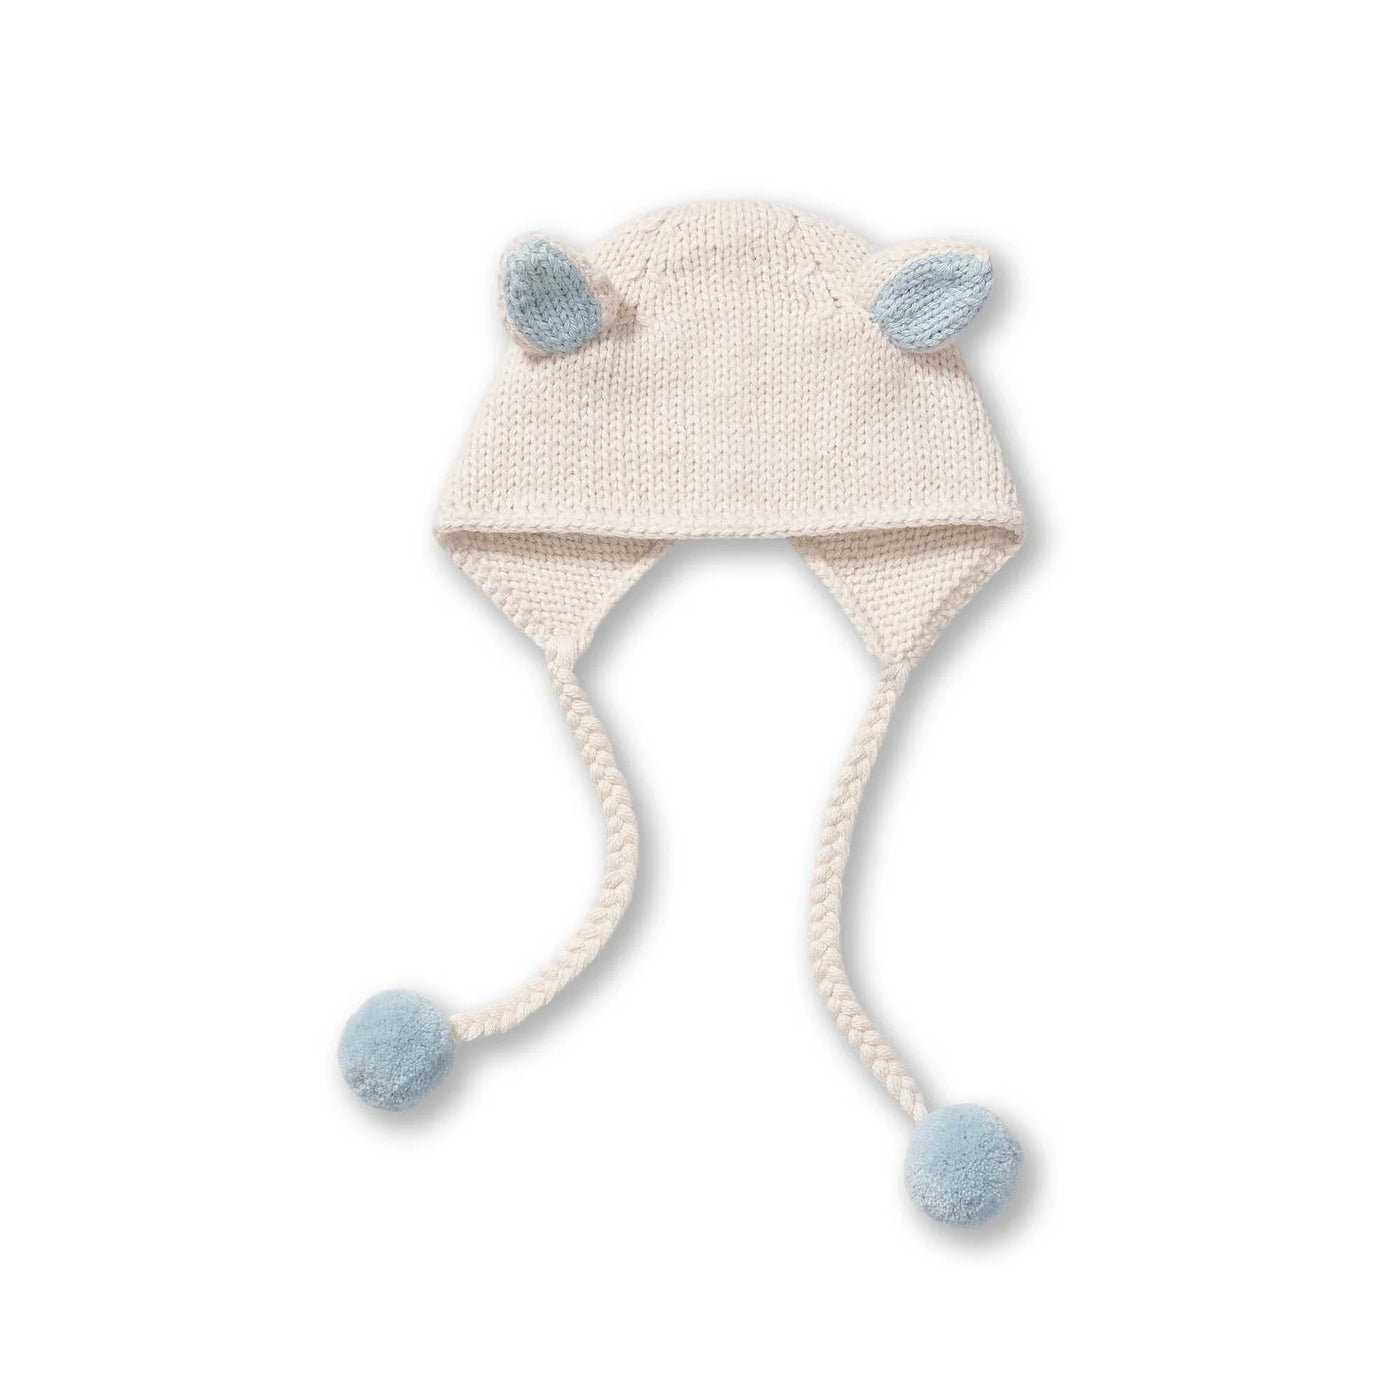 ALICIA ADAMS BUNNY HAT BABY (Available in 4 Sizes and 3 Colors)